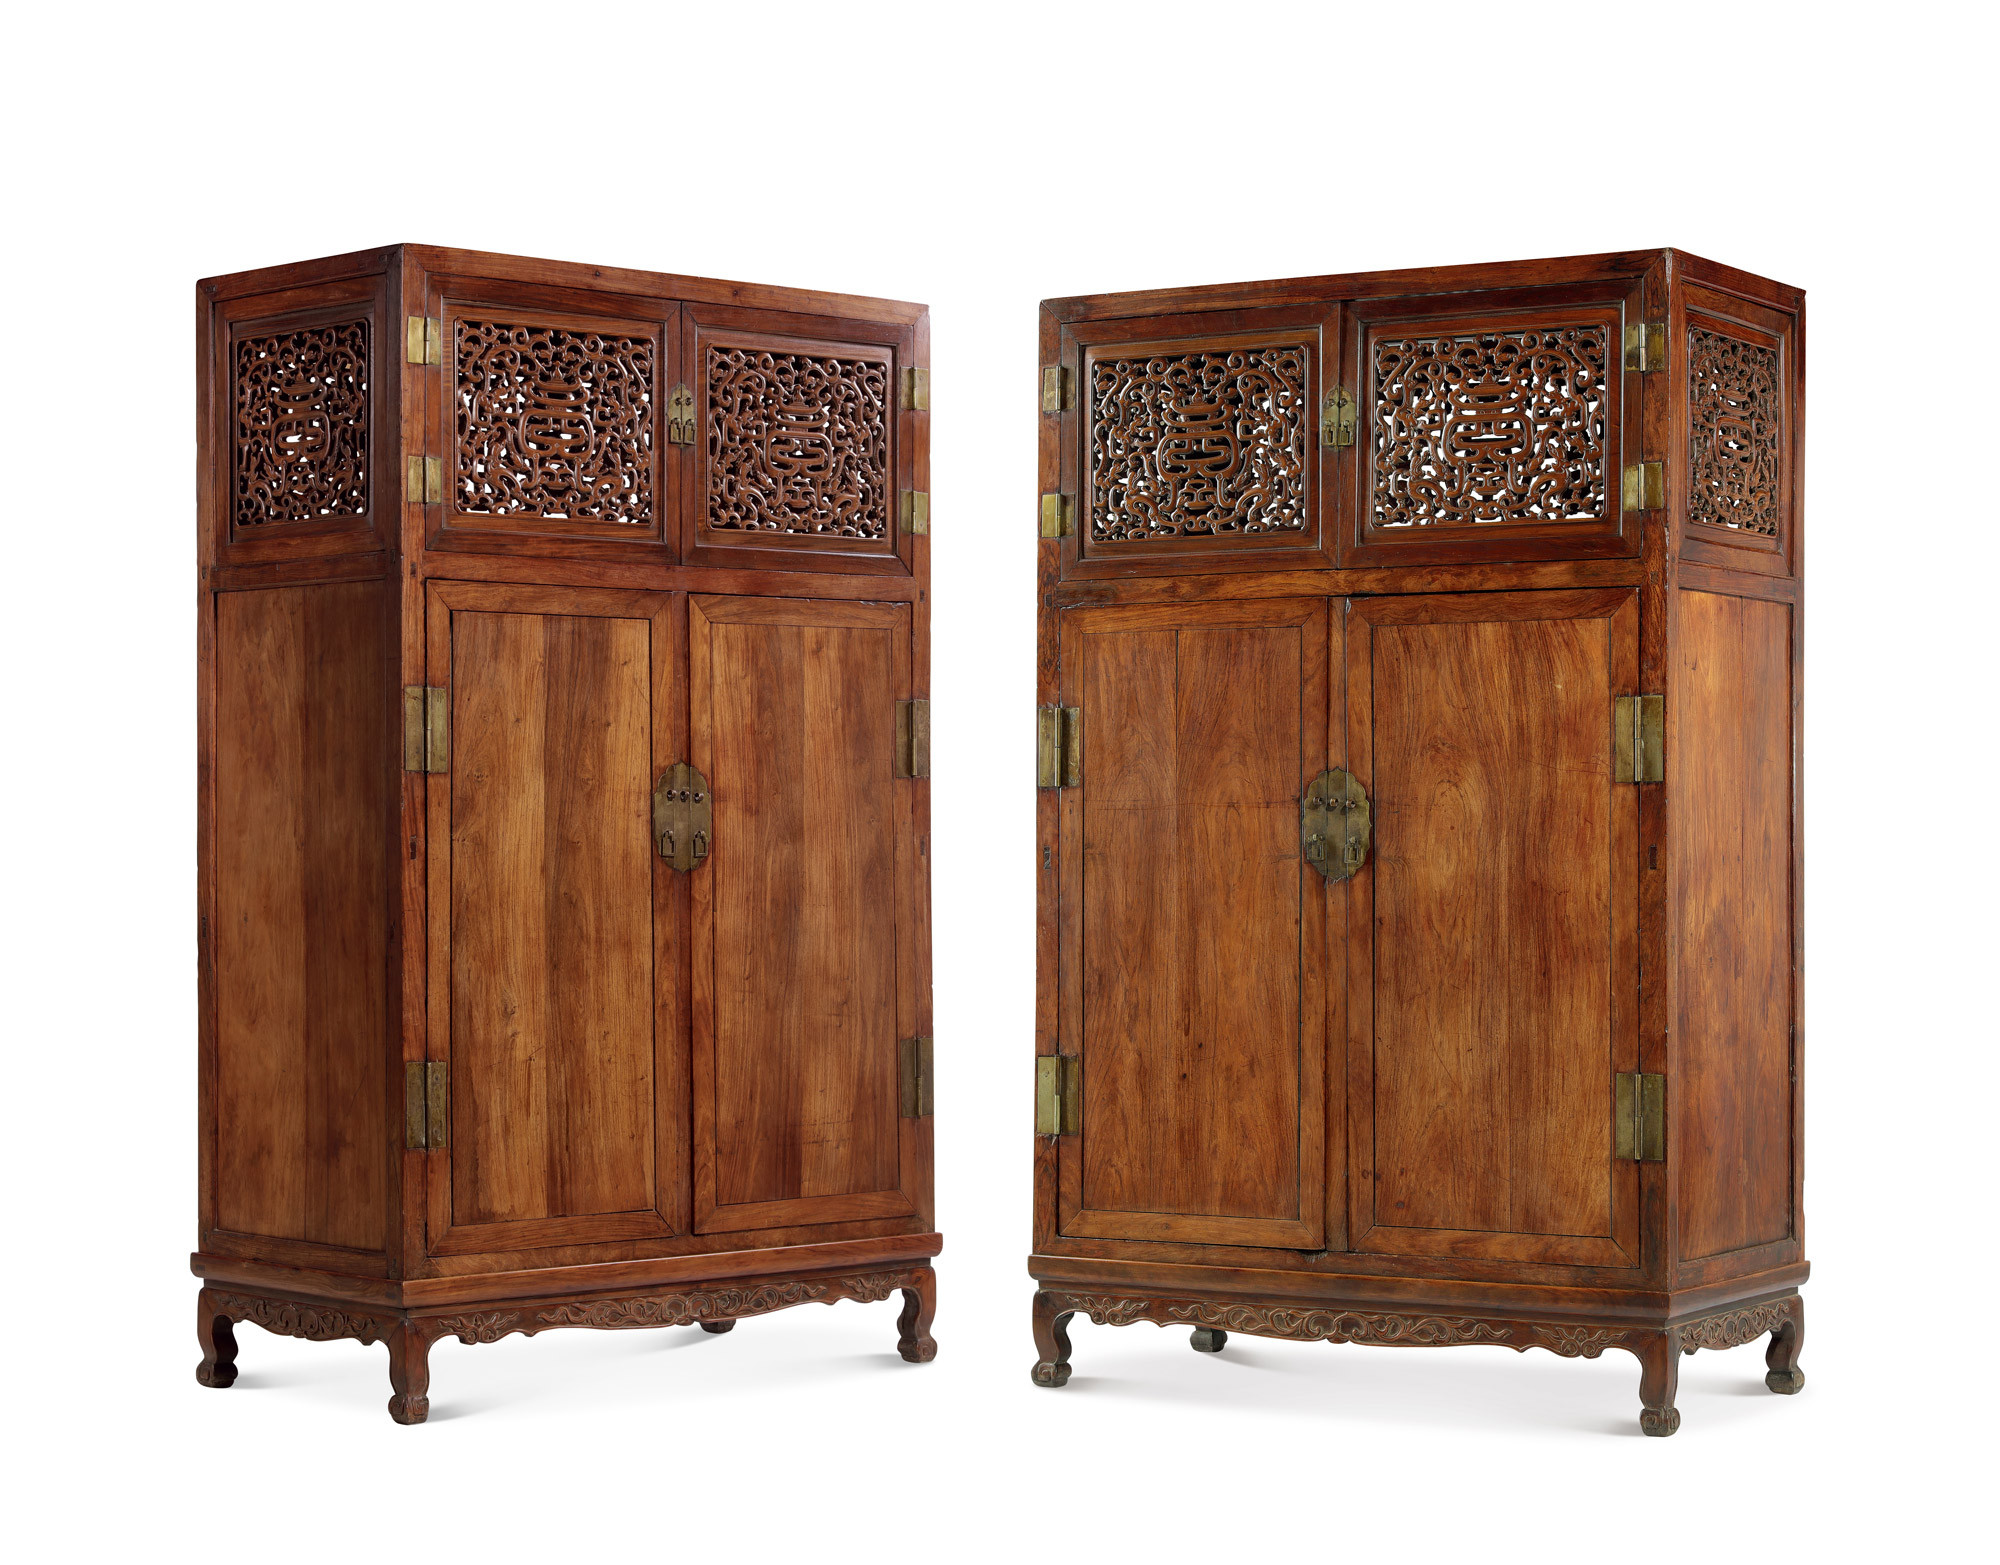 PAIR OF HUANGHUALI CARVED CHI-DRAGON CABINETS